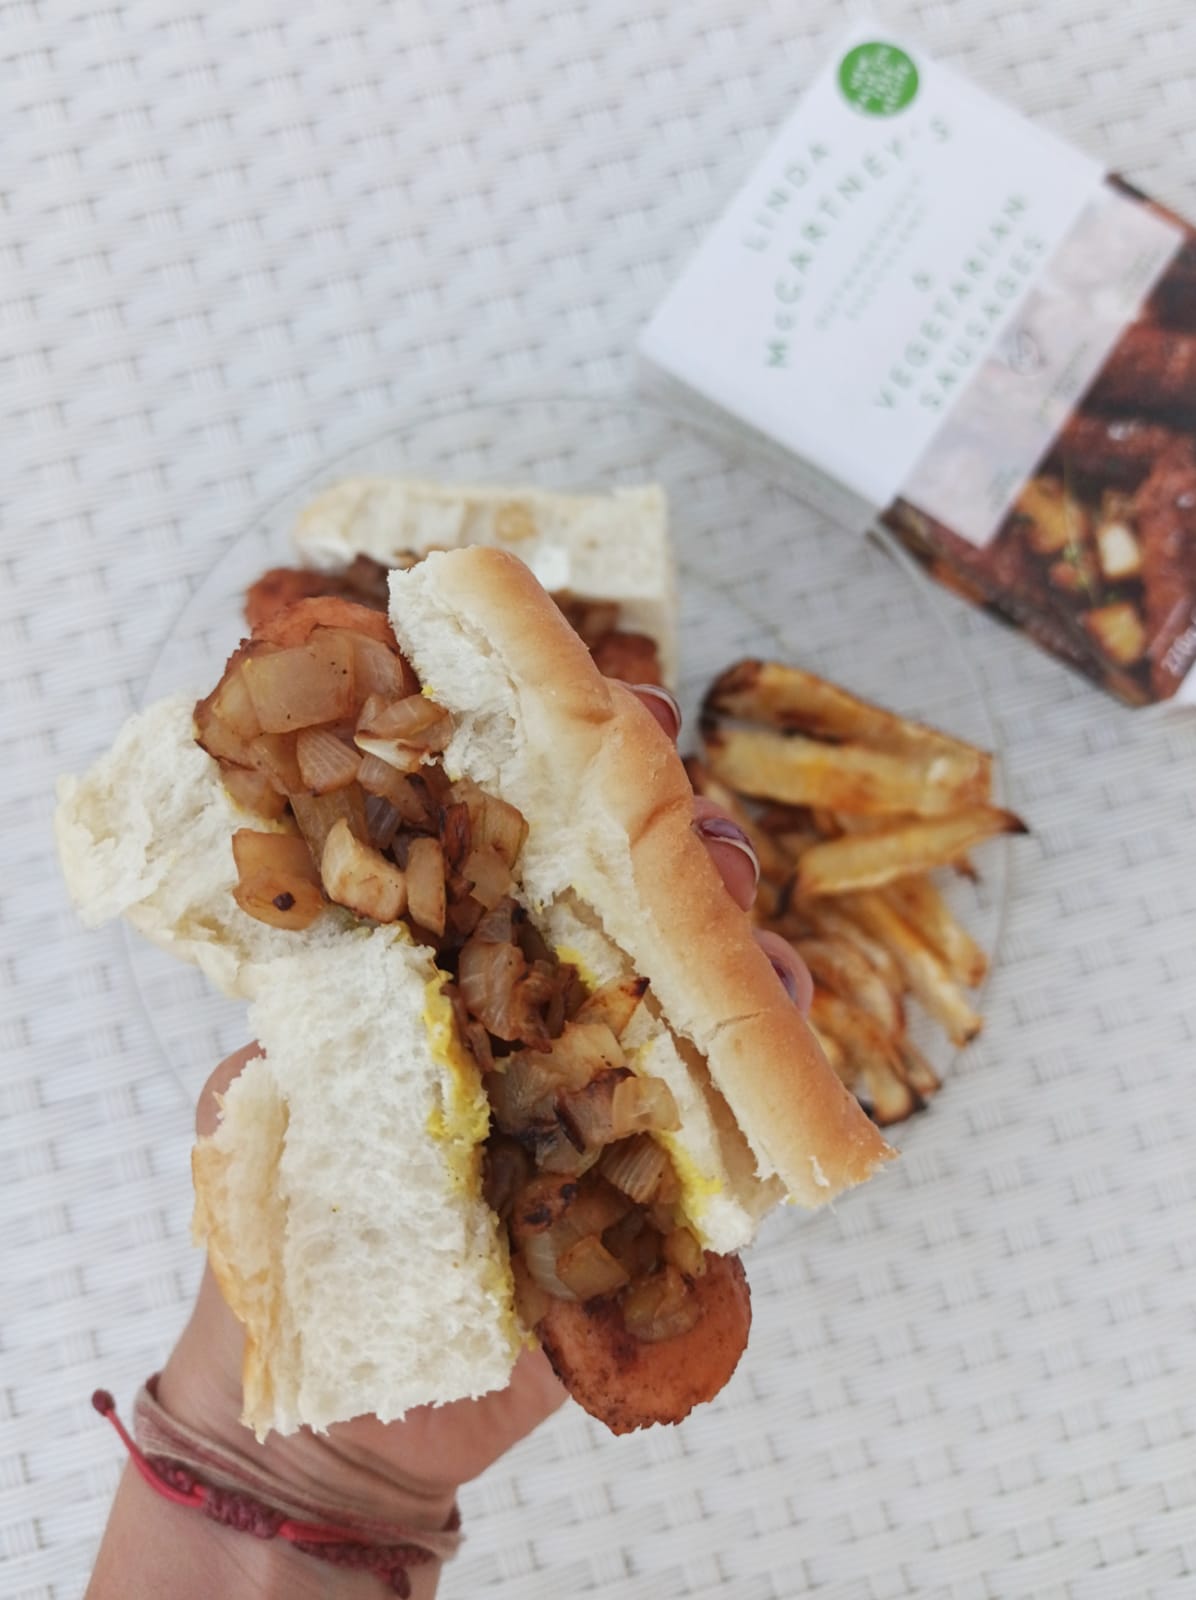 American-style hot dogs with celery root fries vegan malta recipe